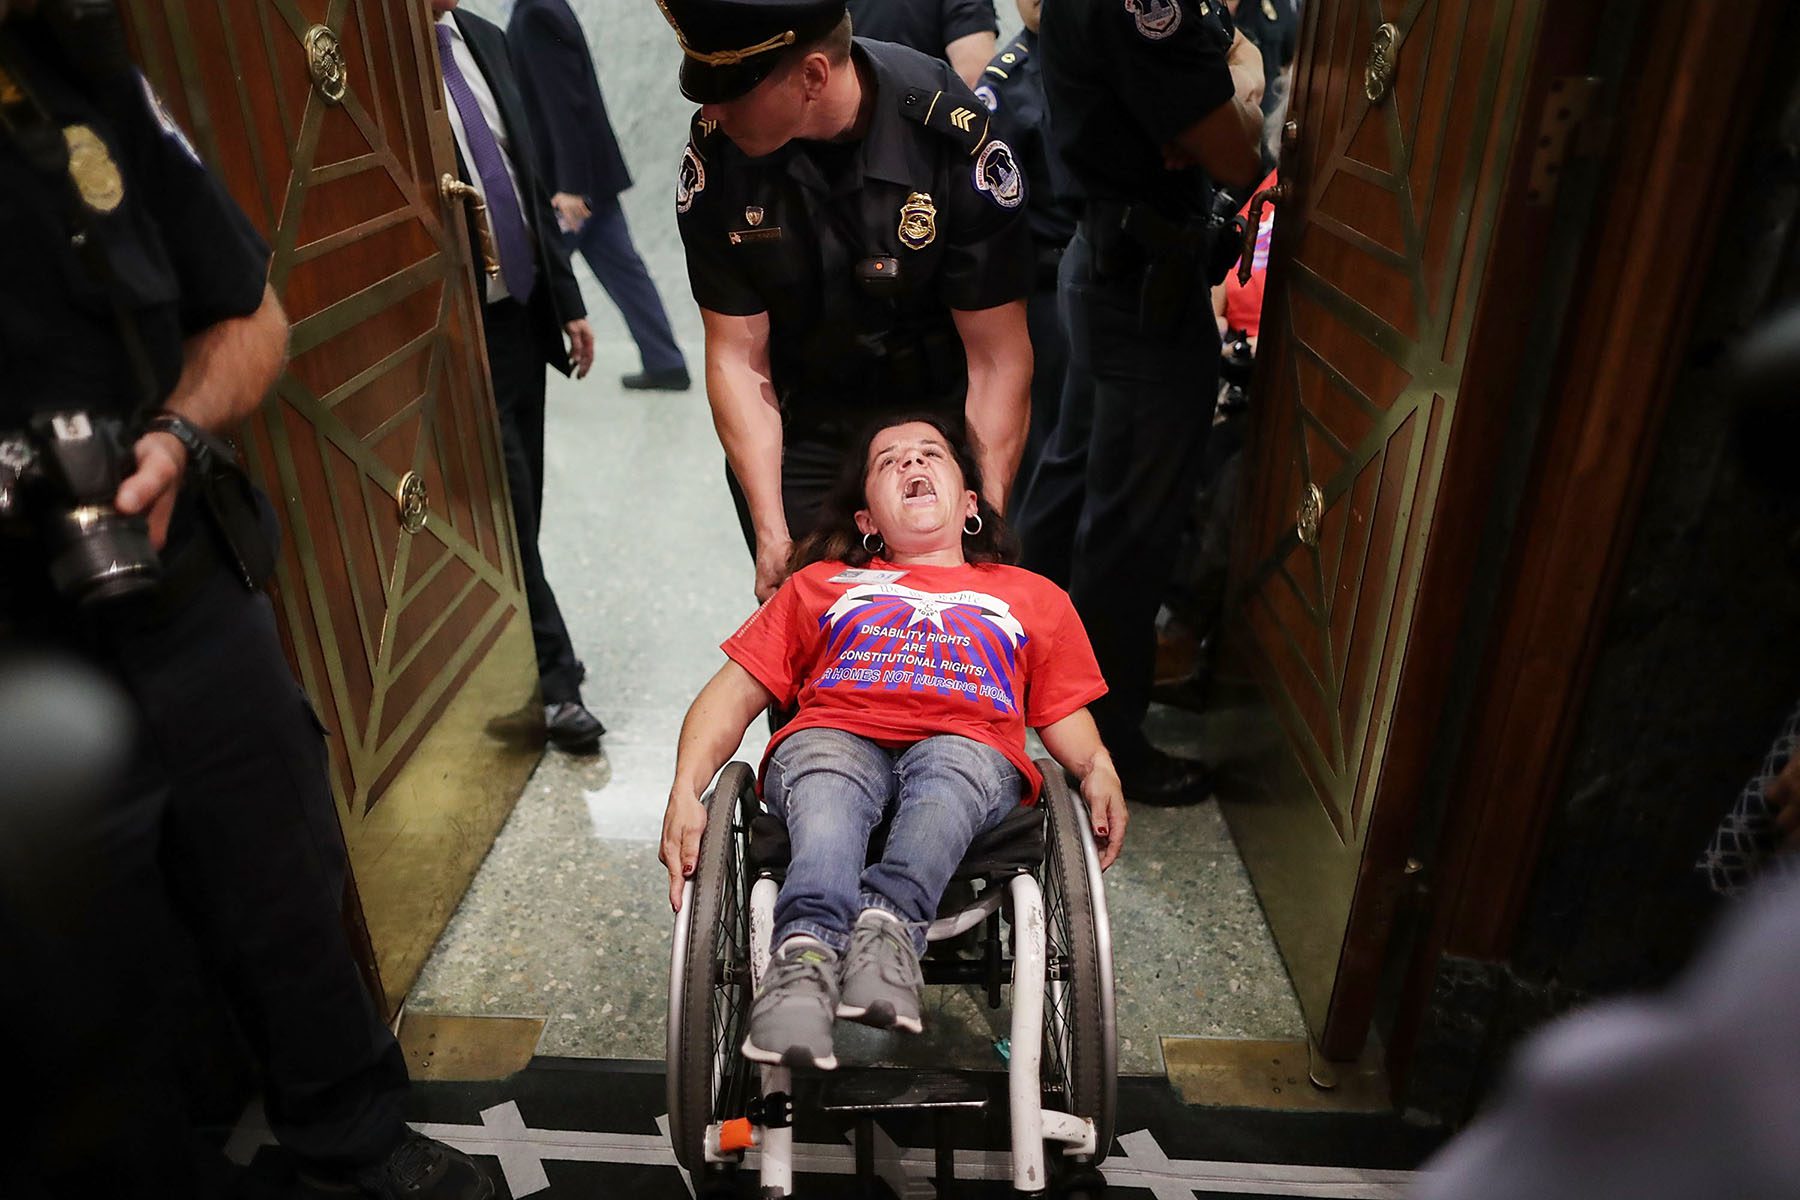 A woman in a wheelchair appears to yell out as a Capitol policeman drags her wheelchair out of a room.